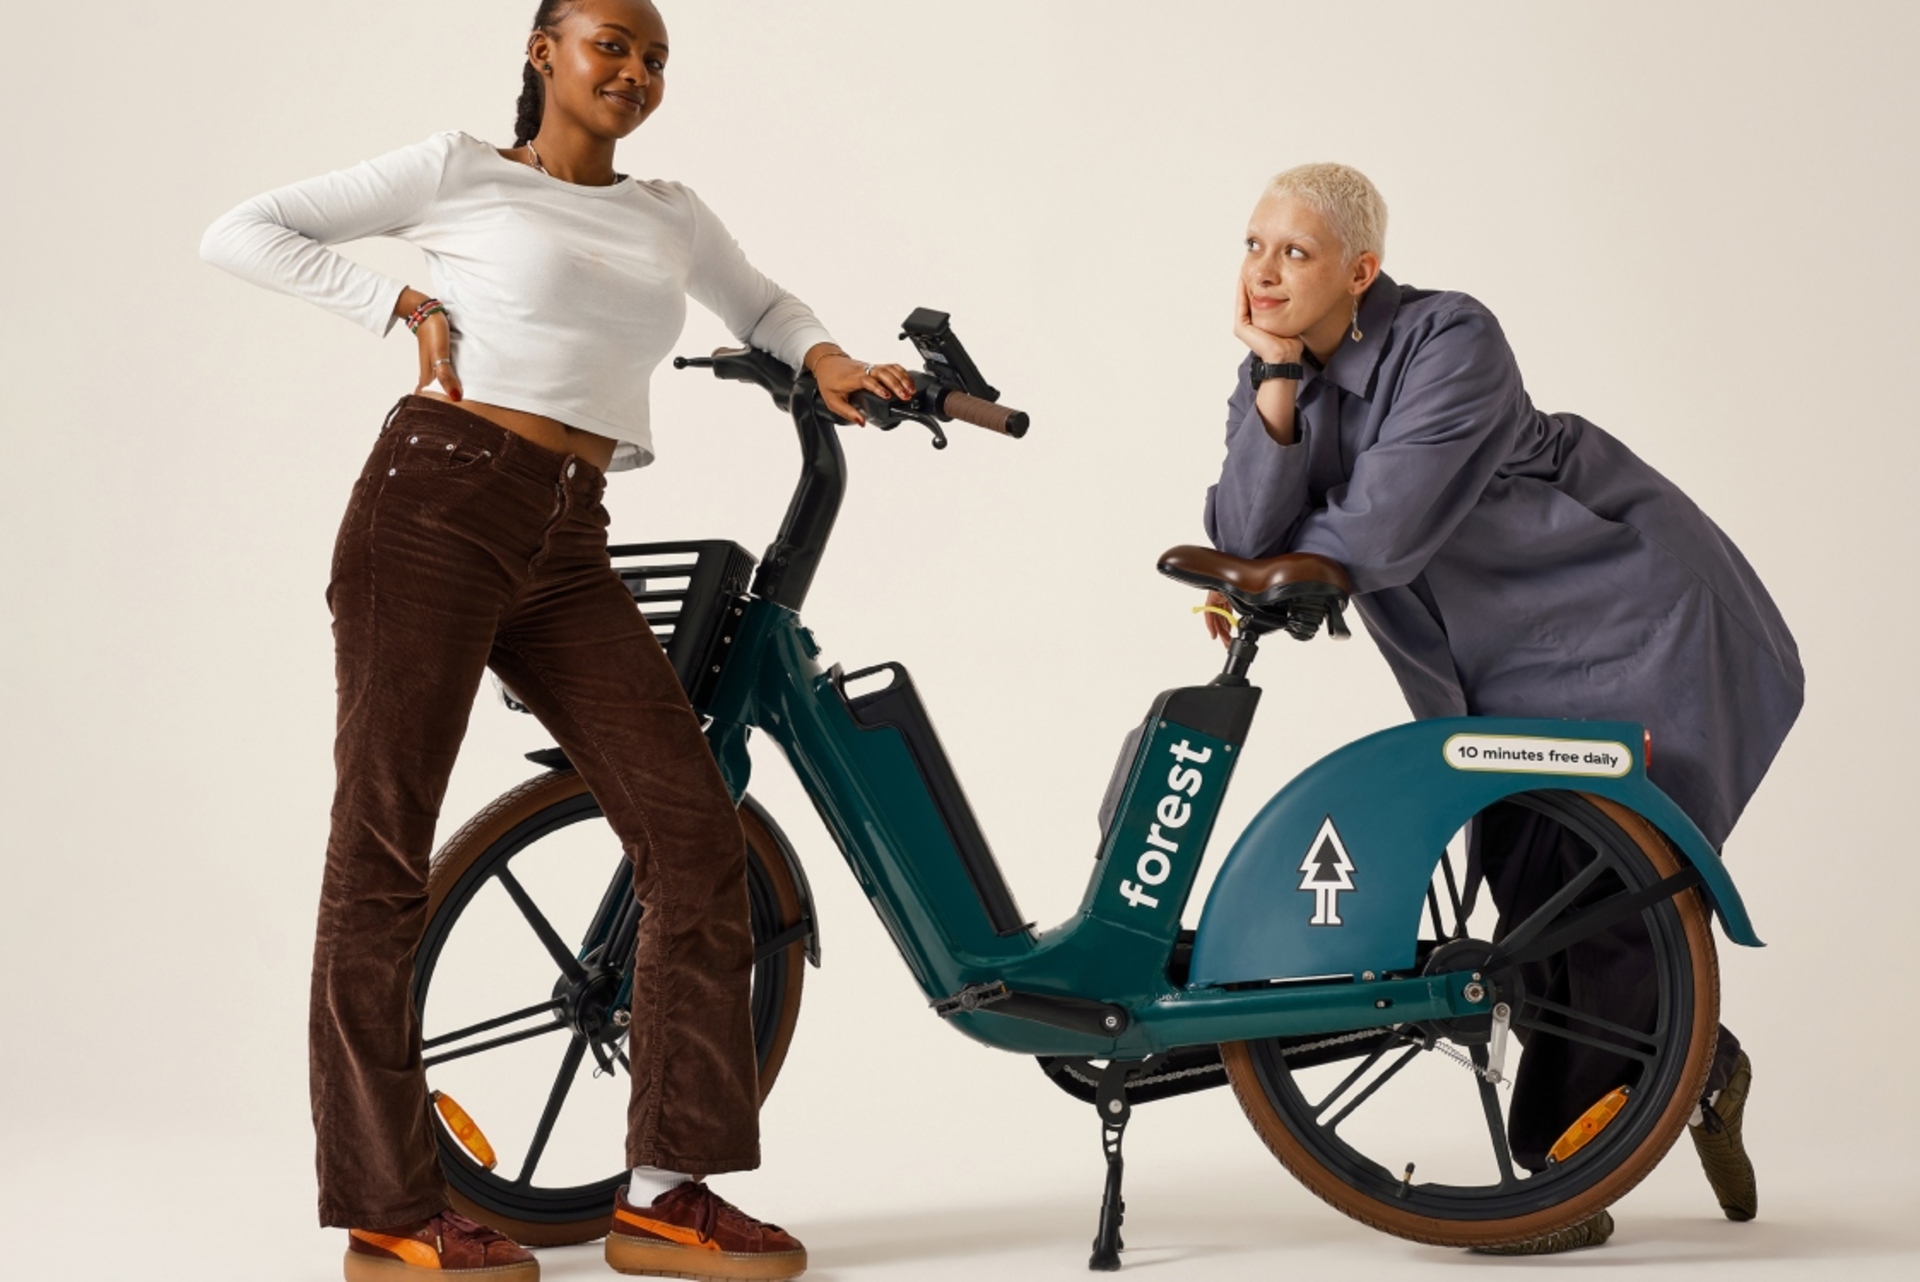 Pedalling green credentials: How Forest increased 'spontaneous' brand awareness